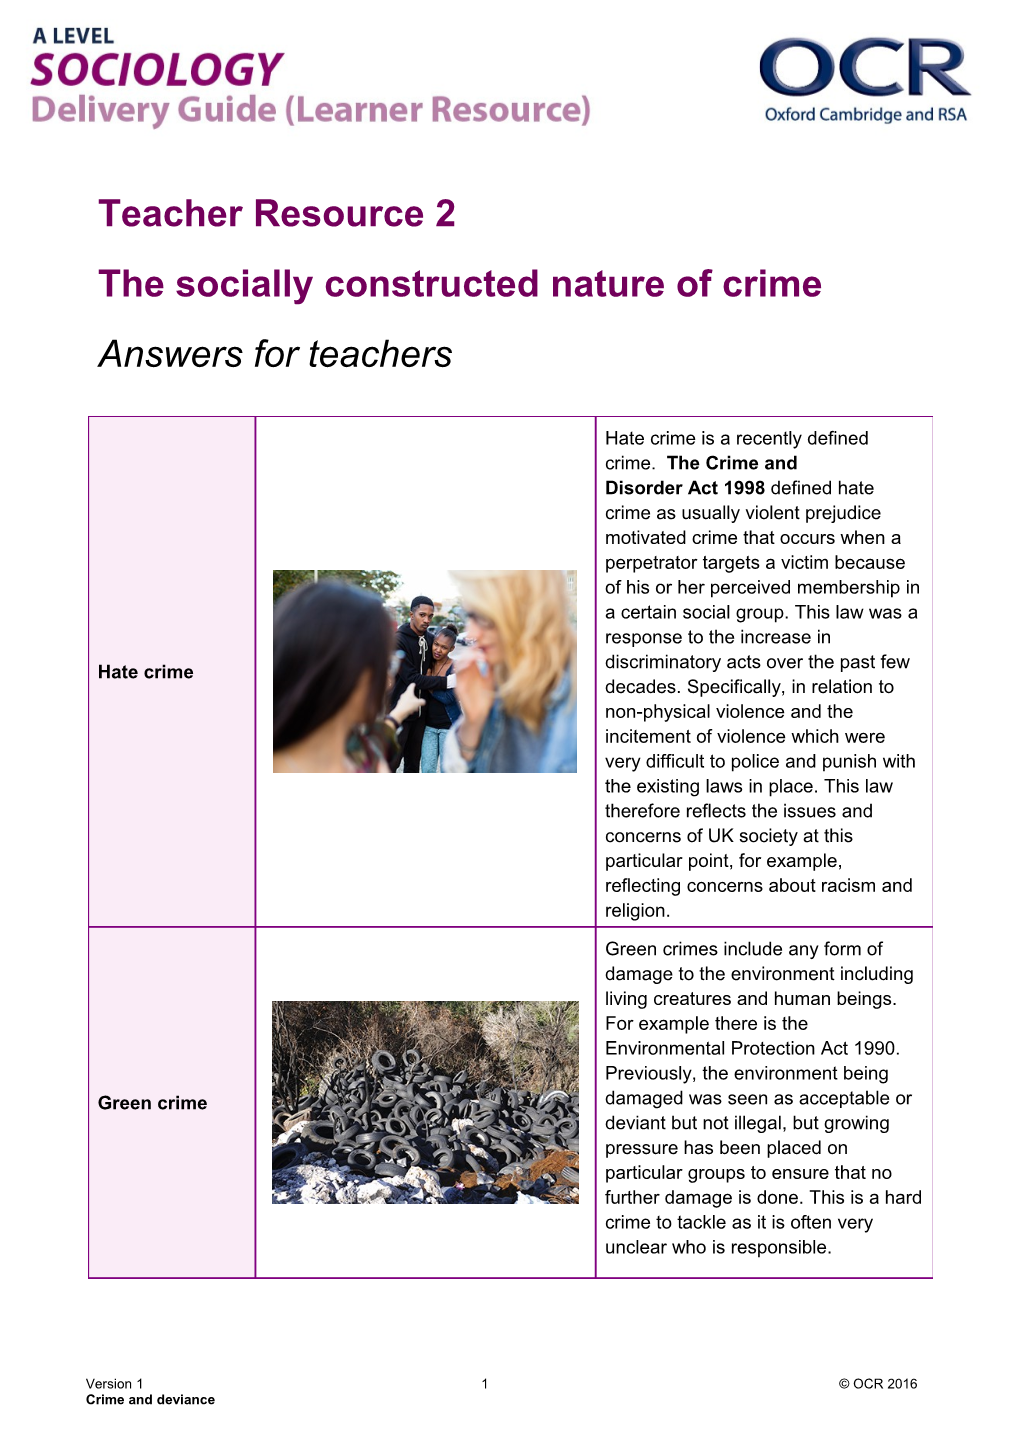 OCR a Level Sociology Delivery Guide Teacher Resource Activity 2